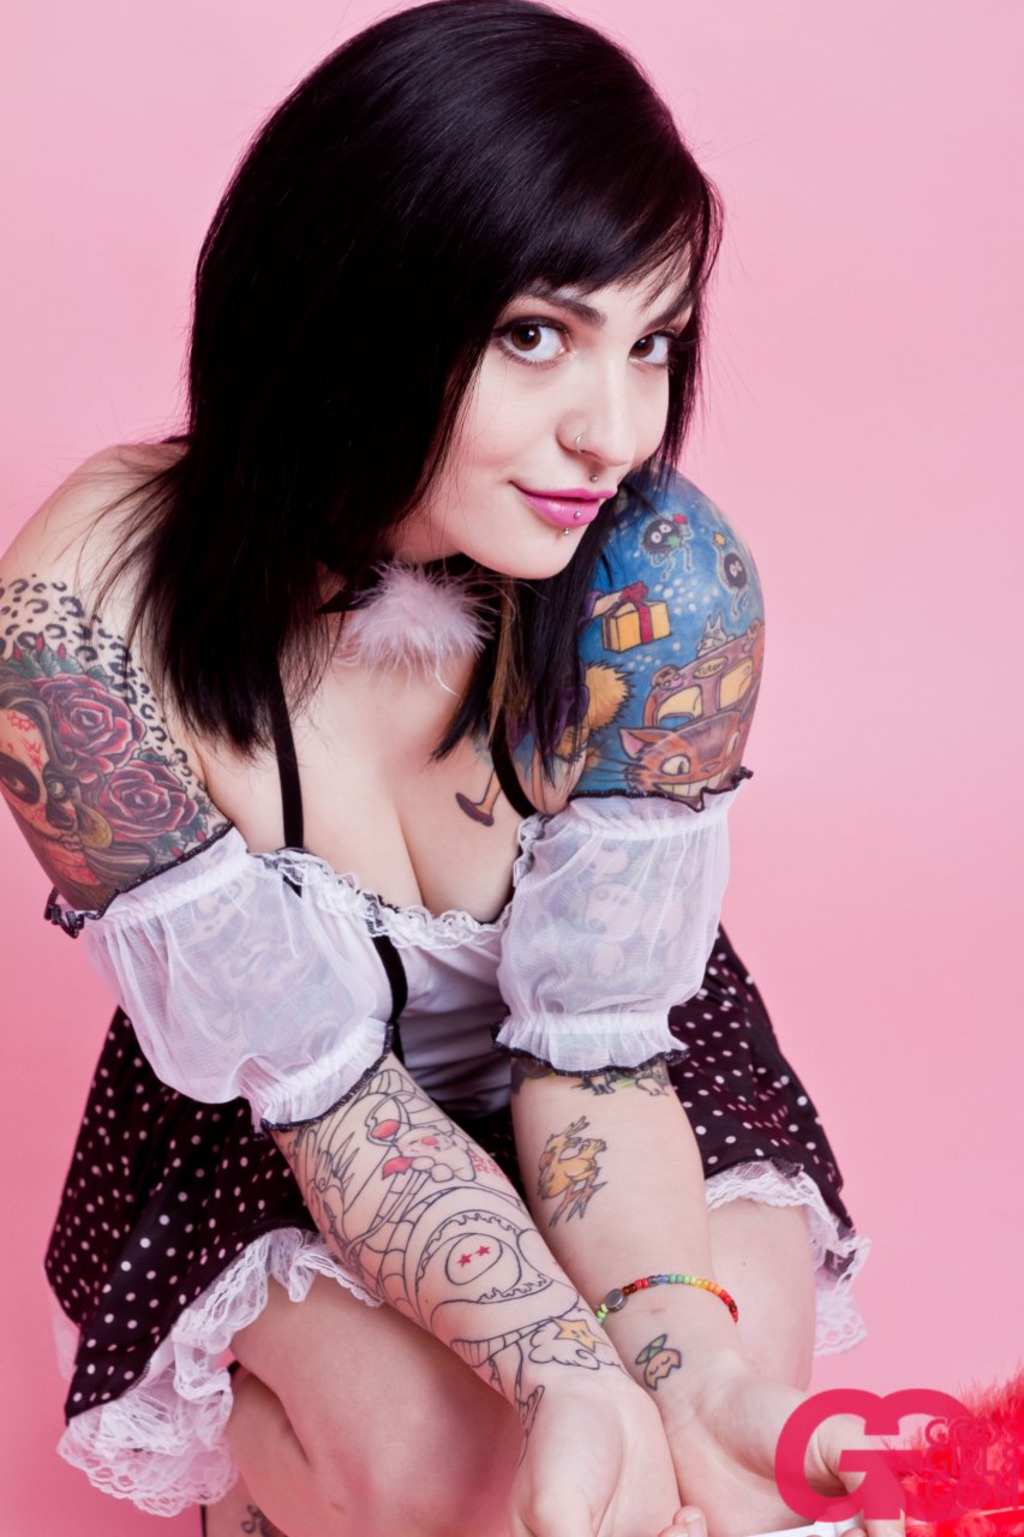 Tattooed Girl In Pink Room 04